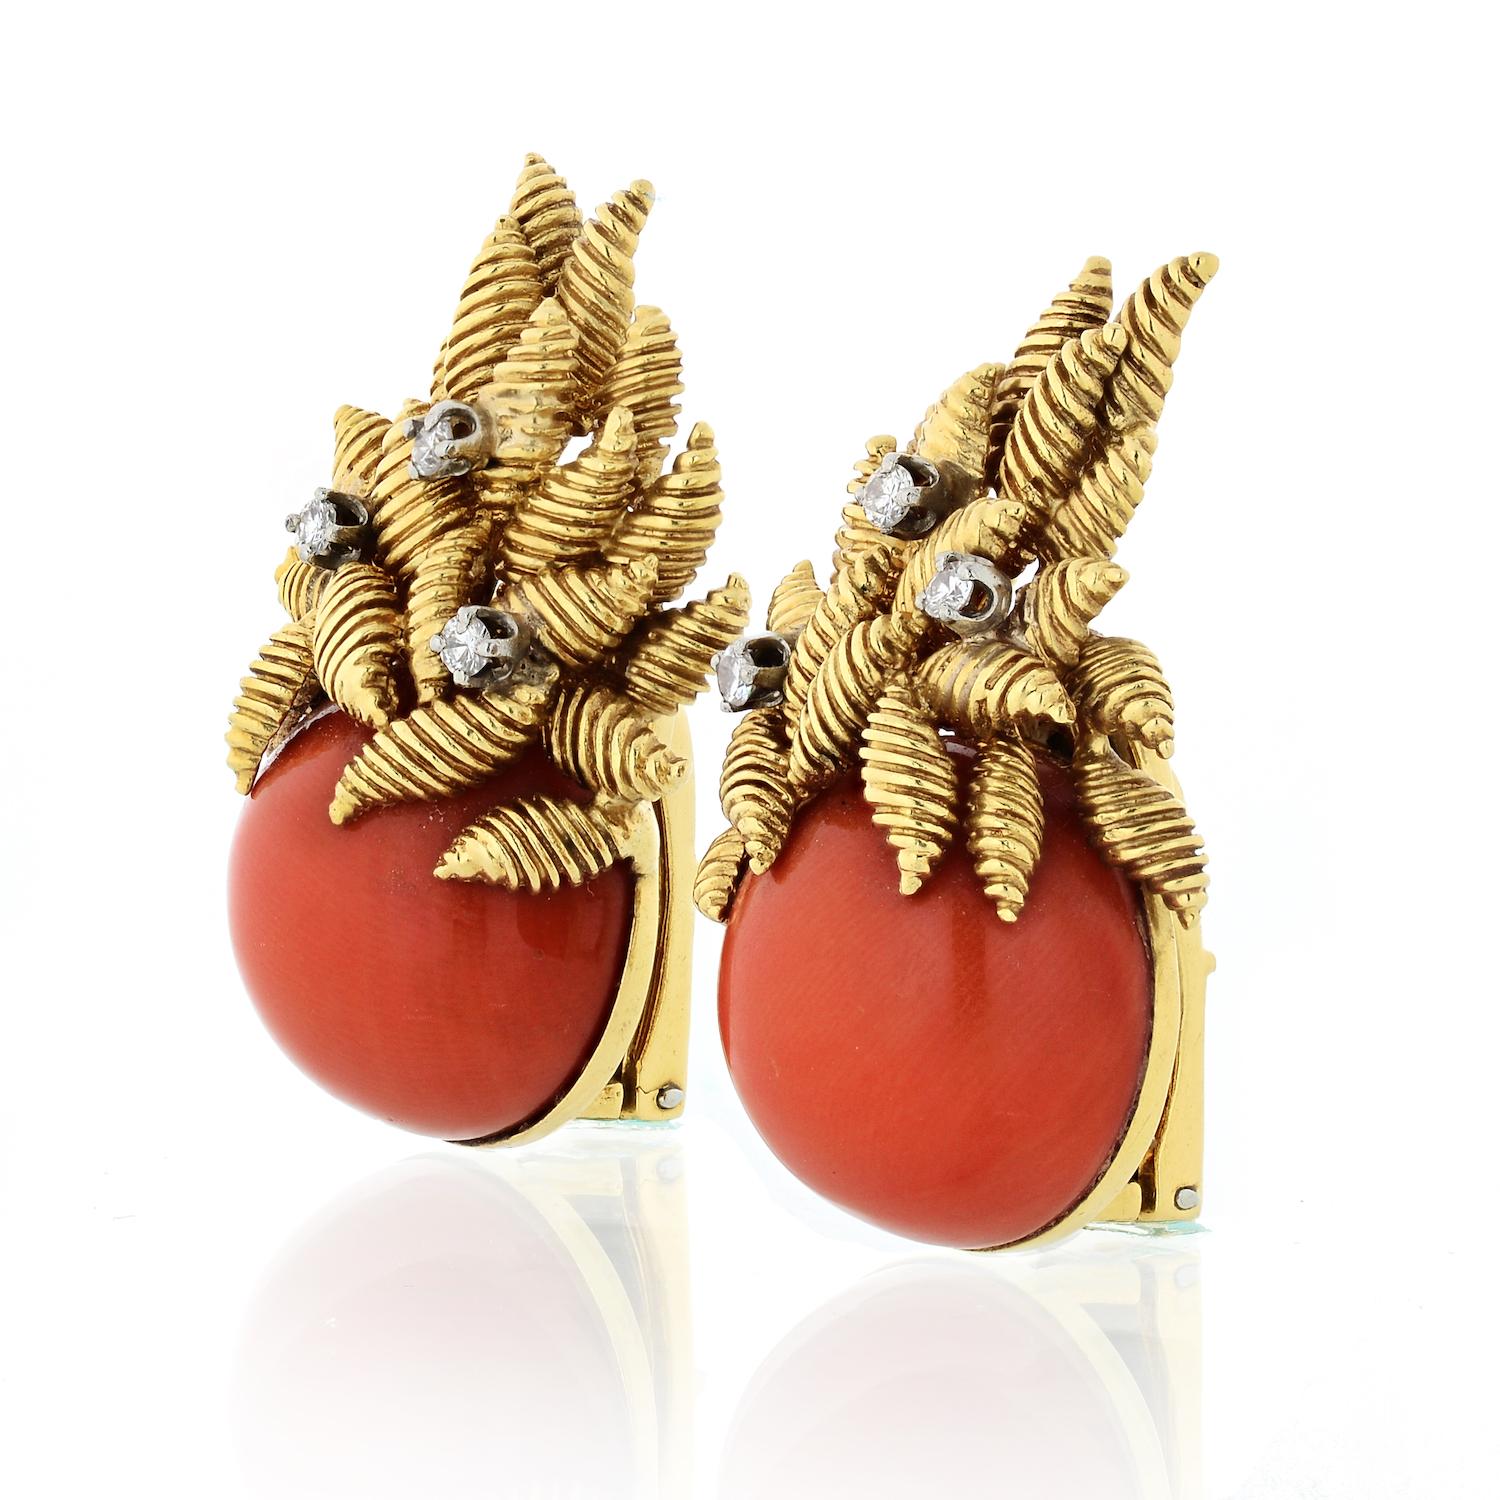 18K Yellow Gold Coral And Diamonds Earrings.
Beautiful clip on gold earrings in 18K solid gold with a bold round coral and textured yellow gold leaves coming up the ear.

These earrings are from the 1960's so expect some wear in the back but we will